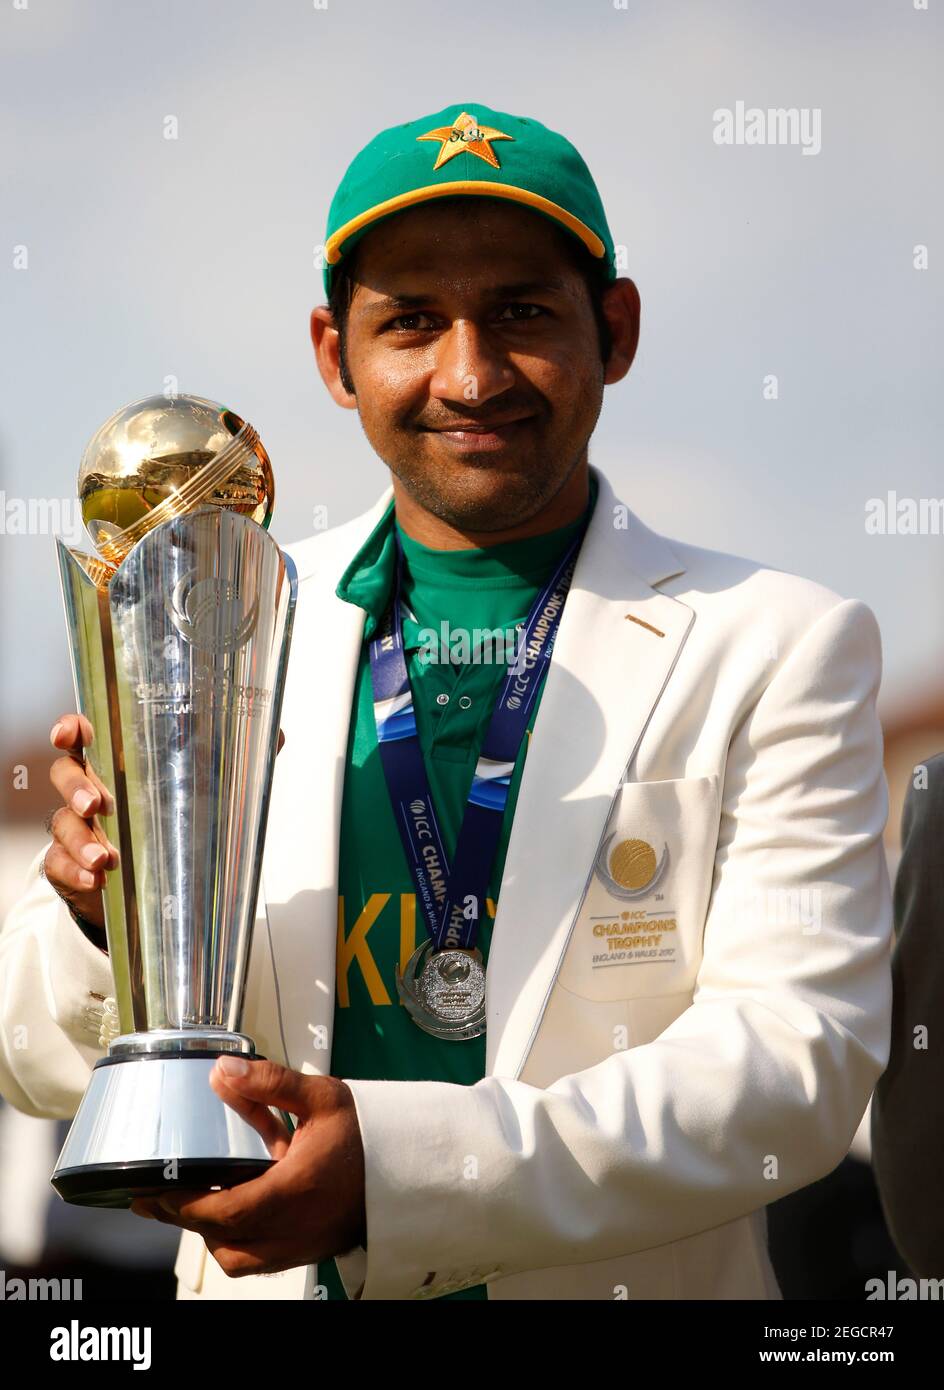 Britain Cricket - Pakistan v India - 2017 ICC Champions Trophy Final The Oval - June 18, 2017 Pakistan's Sarfraz poses as he celebrates winning the ICC Champions Trophy Action